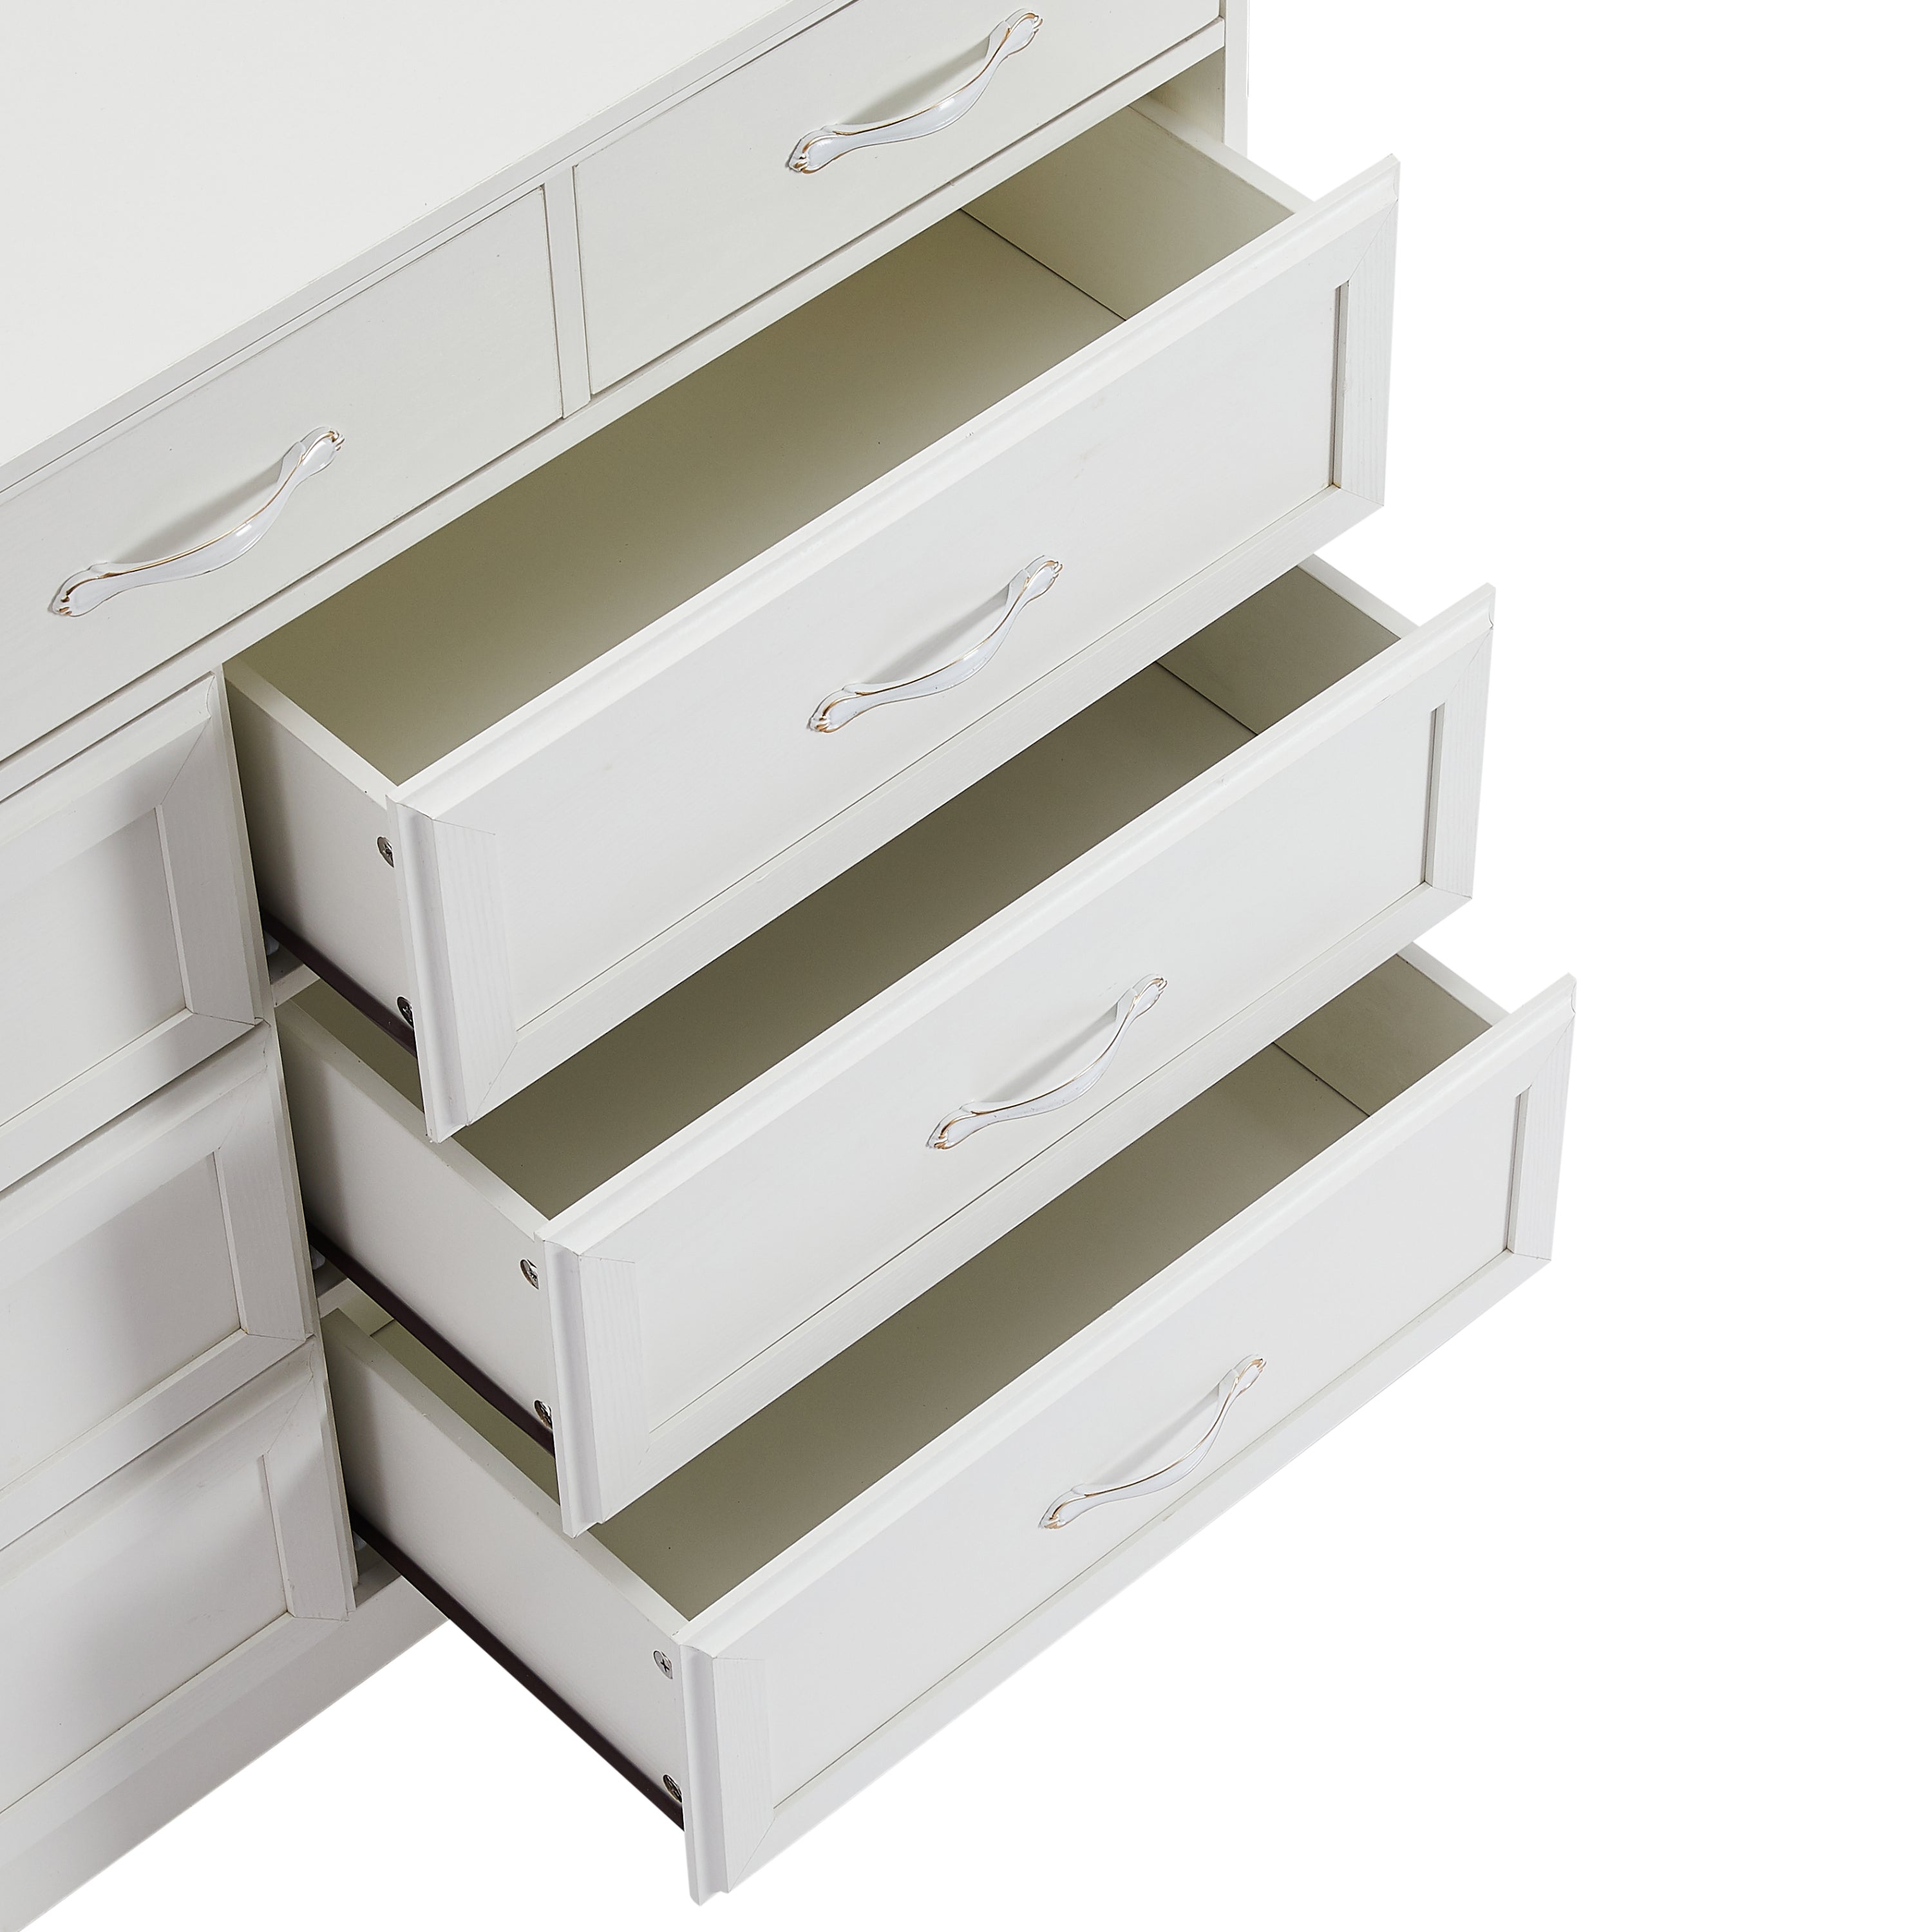 Bedroom dresser, 9 drawer long dresser with antique handles, wood chest of drawers for kids room, living room, entry and hallway, White, 47.2''W x 15.8''D x 34.6''H.